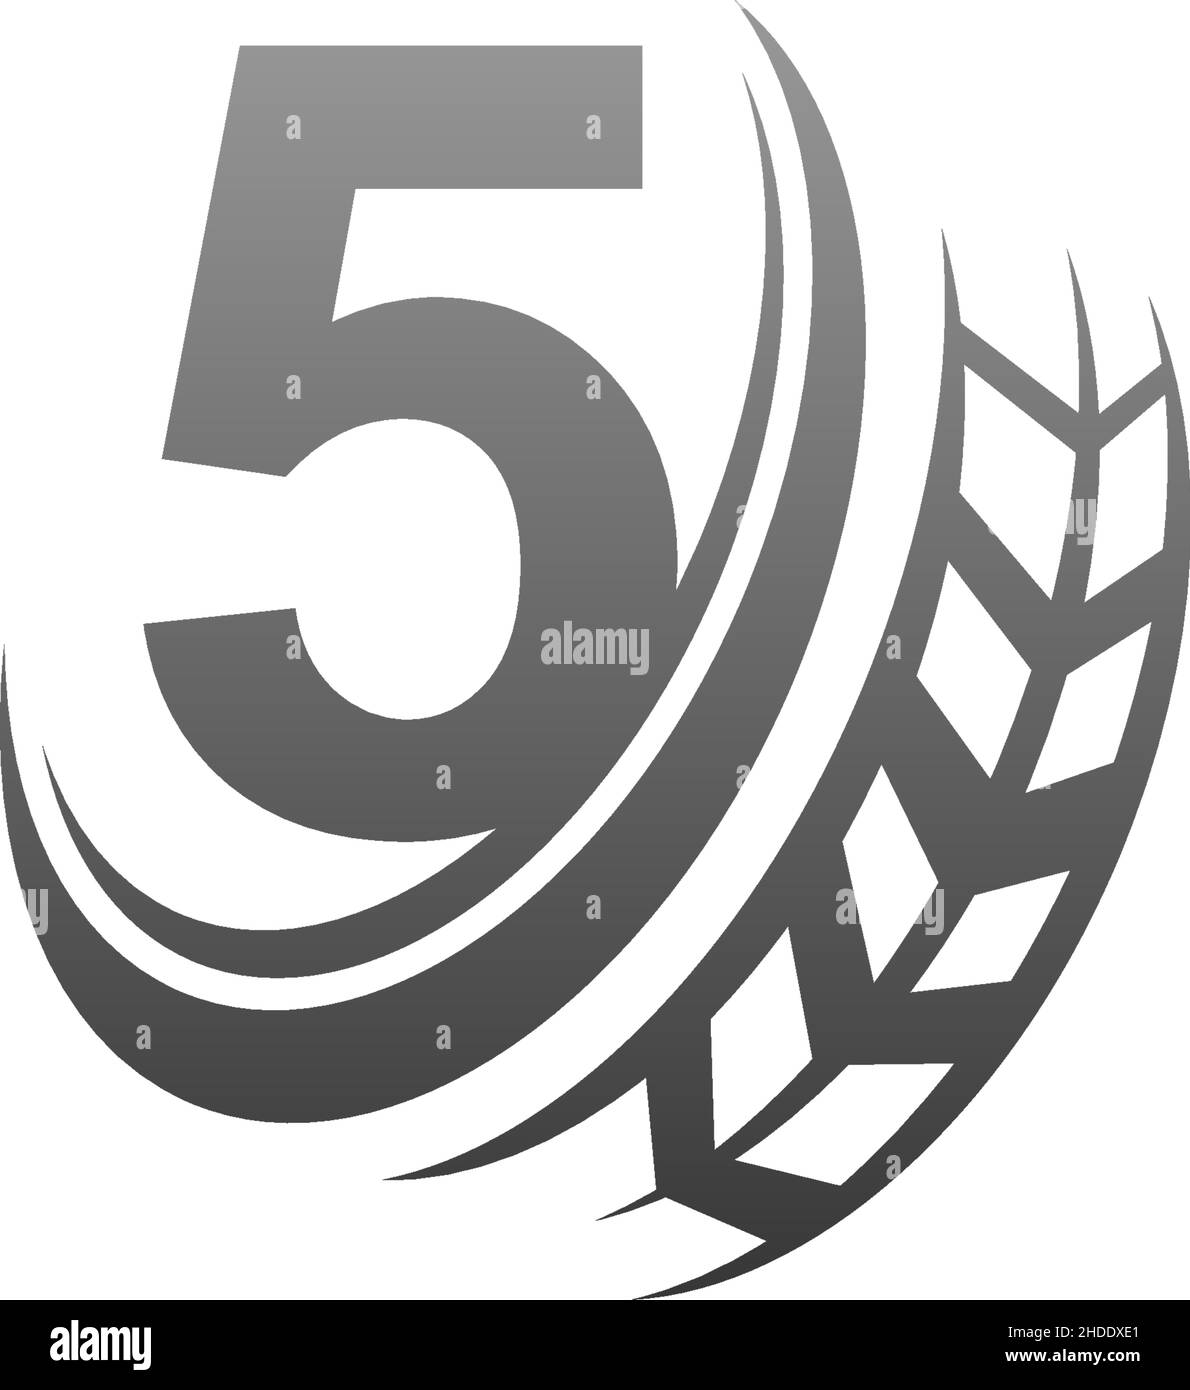 Number 5 with trailing wheel icon design template illustration vector Stock Vector